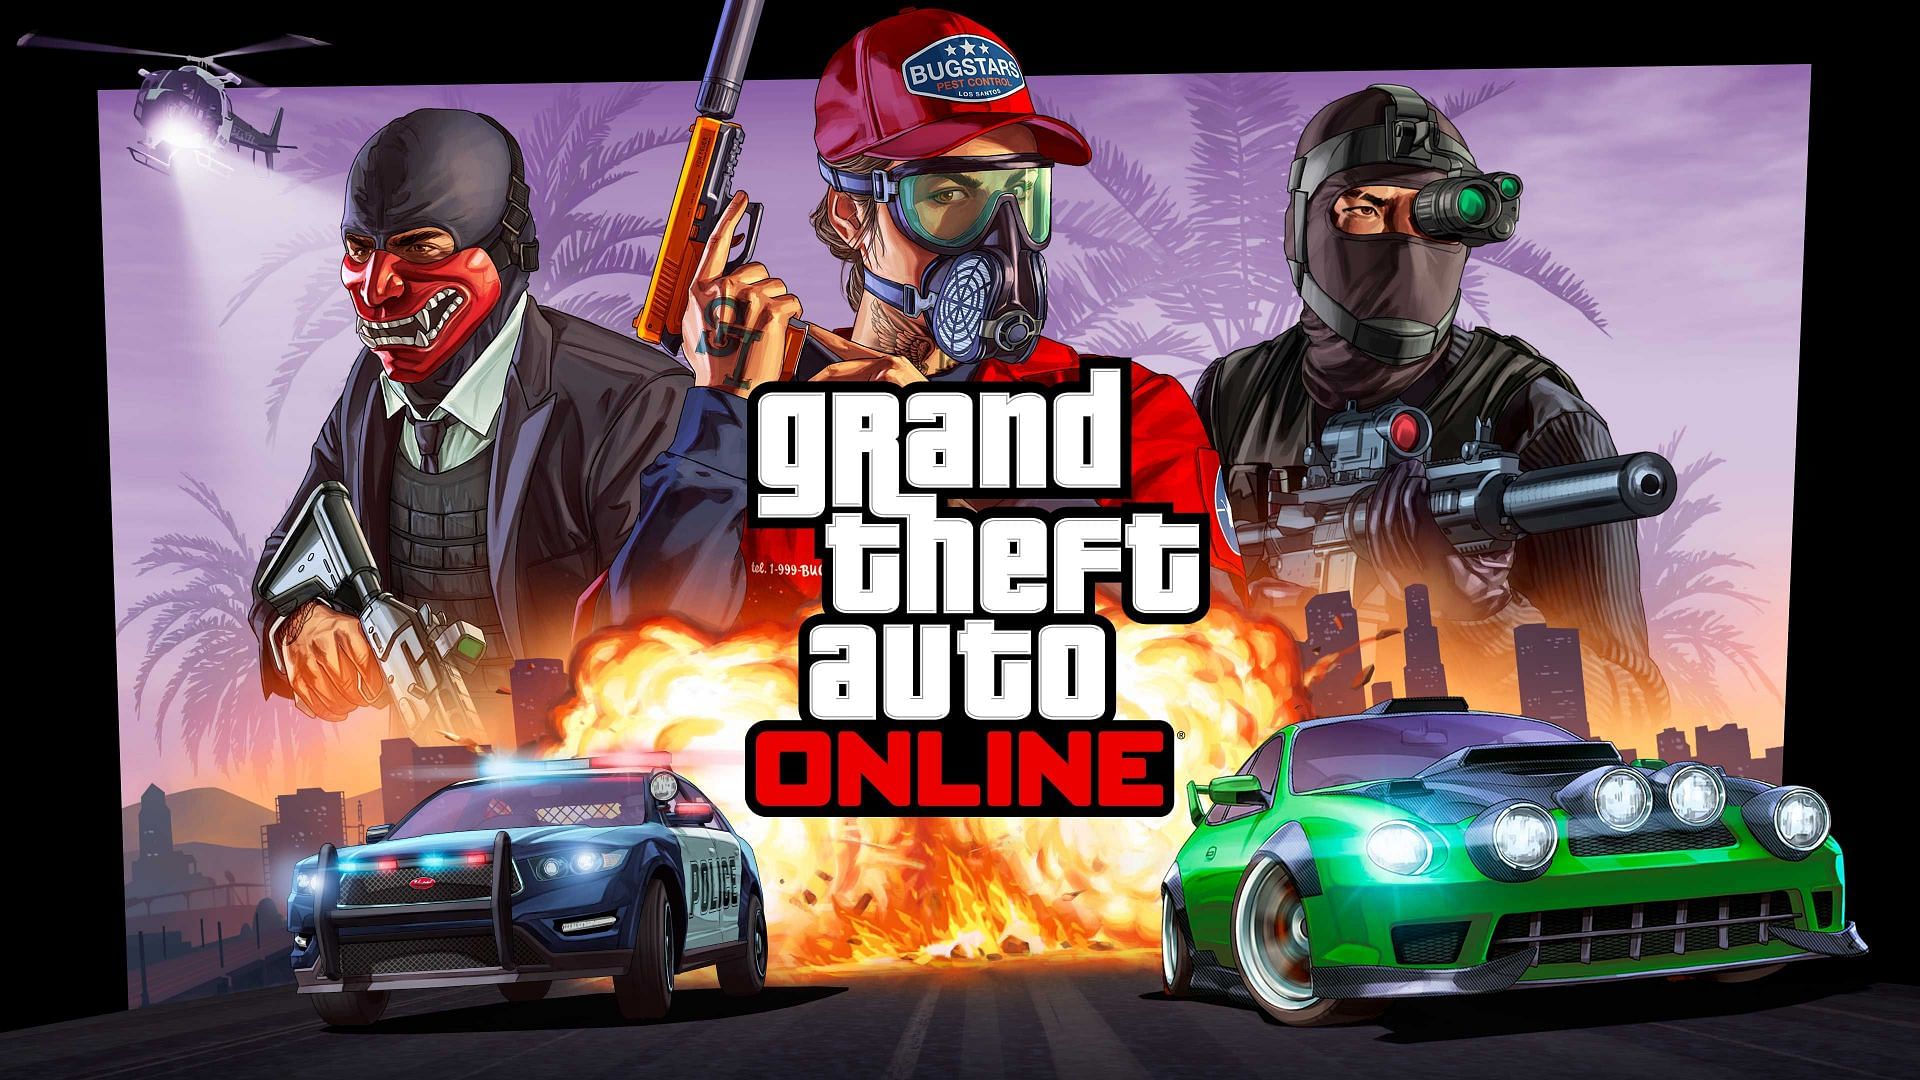 GTA Online could be purchased separately on the PS5 and Xbox Series from Grand Theft Auto 5 (Image via Rockstar Games)